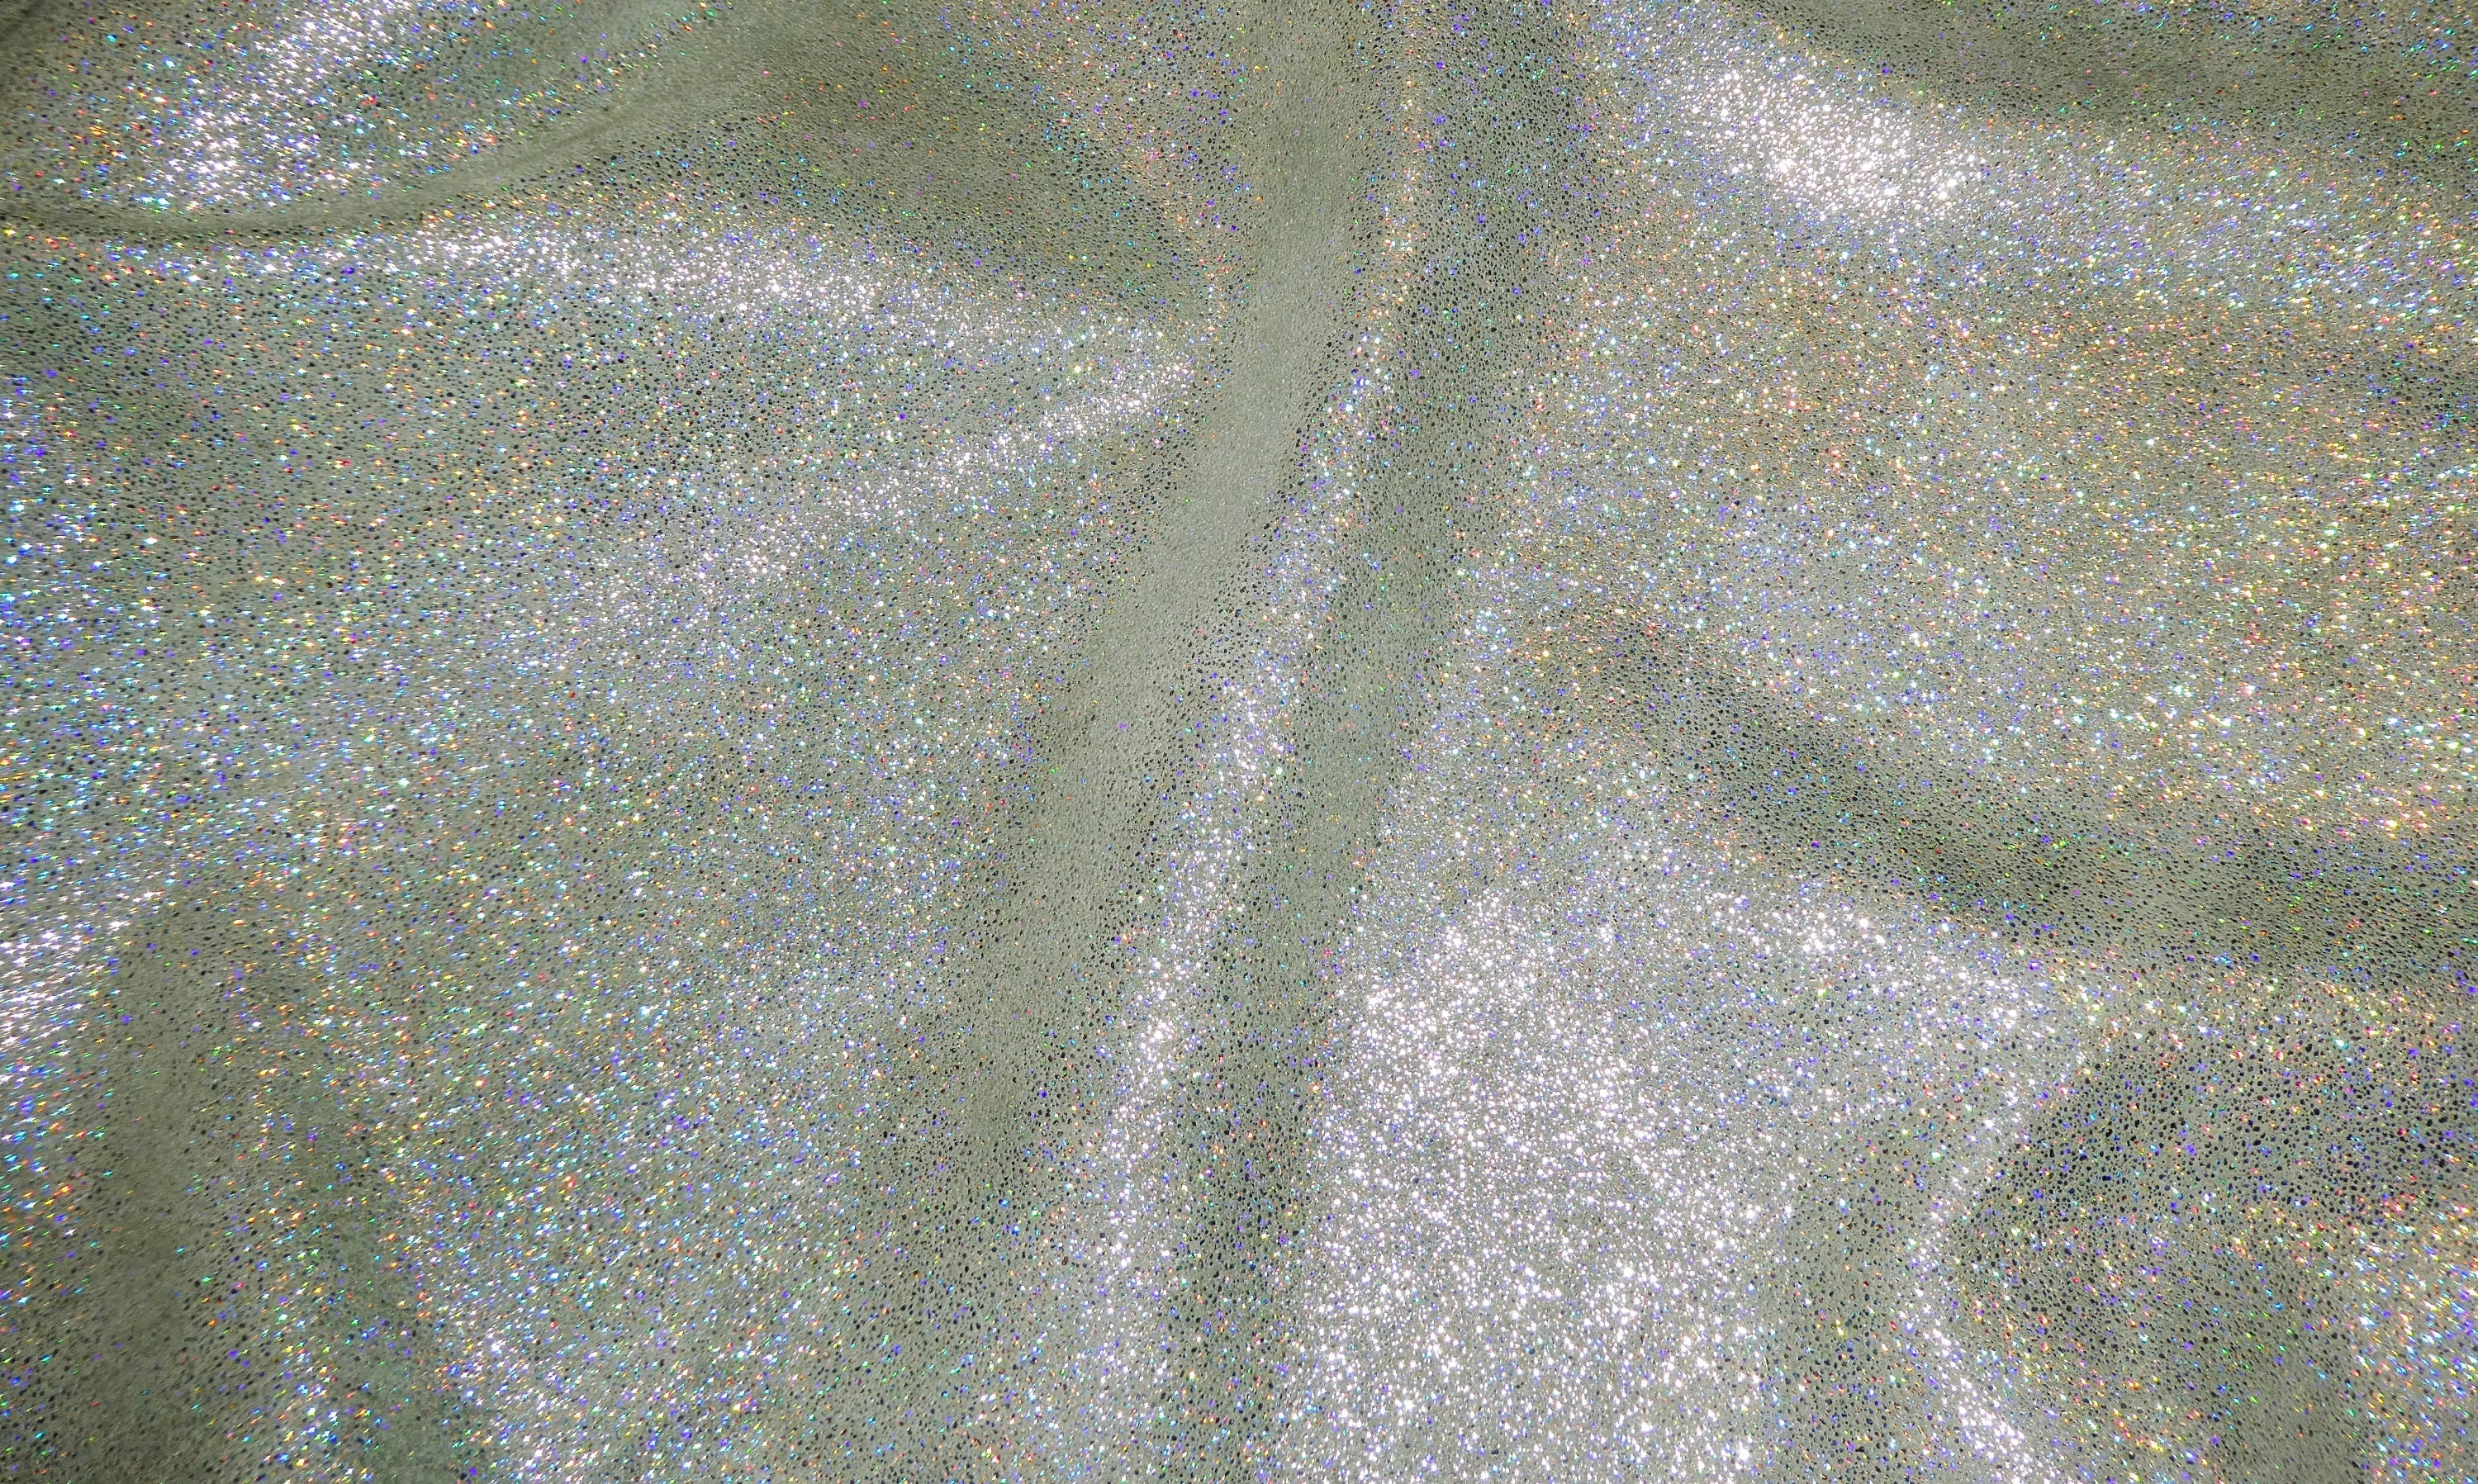 Chunky Glitter 3-4-5 or 6 sq ft ROYAL Blue Metallic Fabric applied to  Leather THICK 6 oz/2.4mm PeggySueAlso® E4355-09